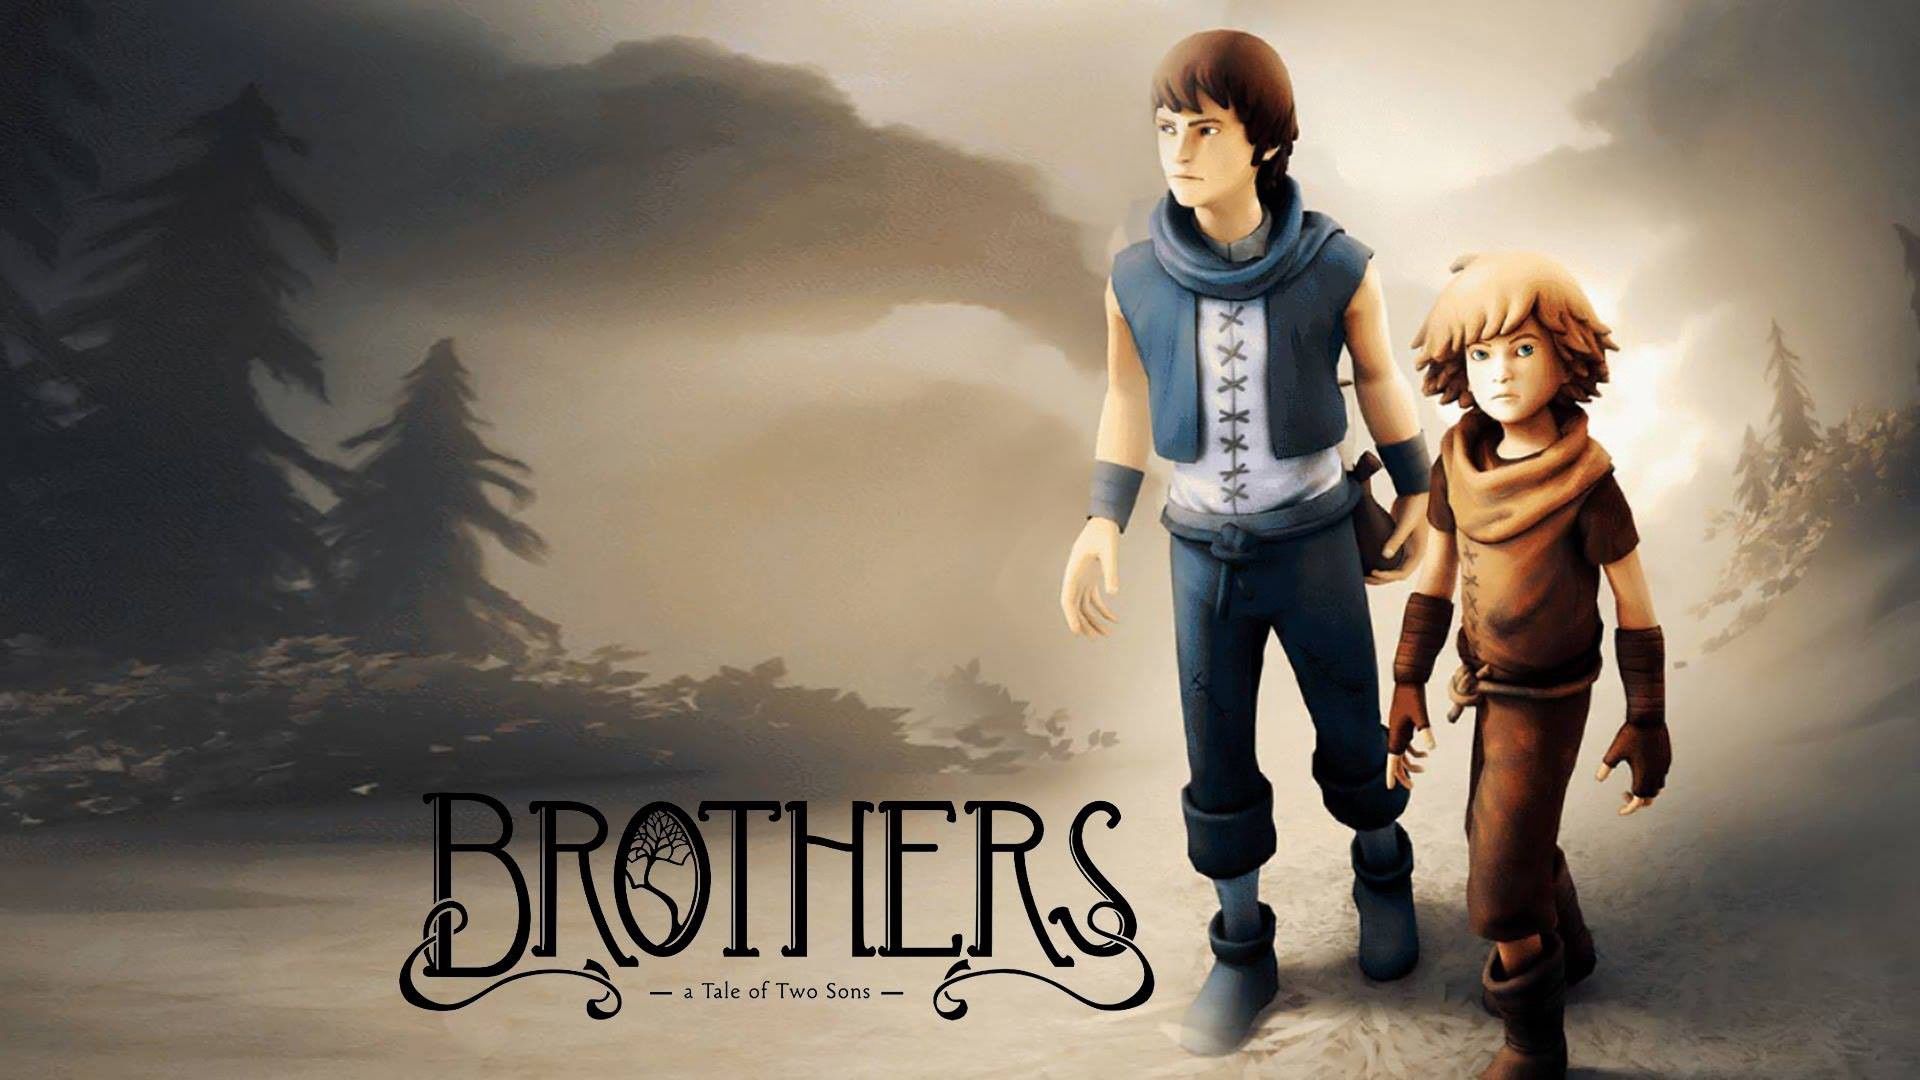 a tale of two brothers game download